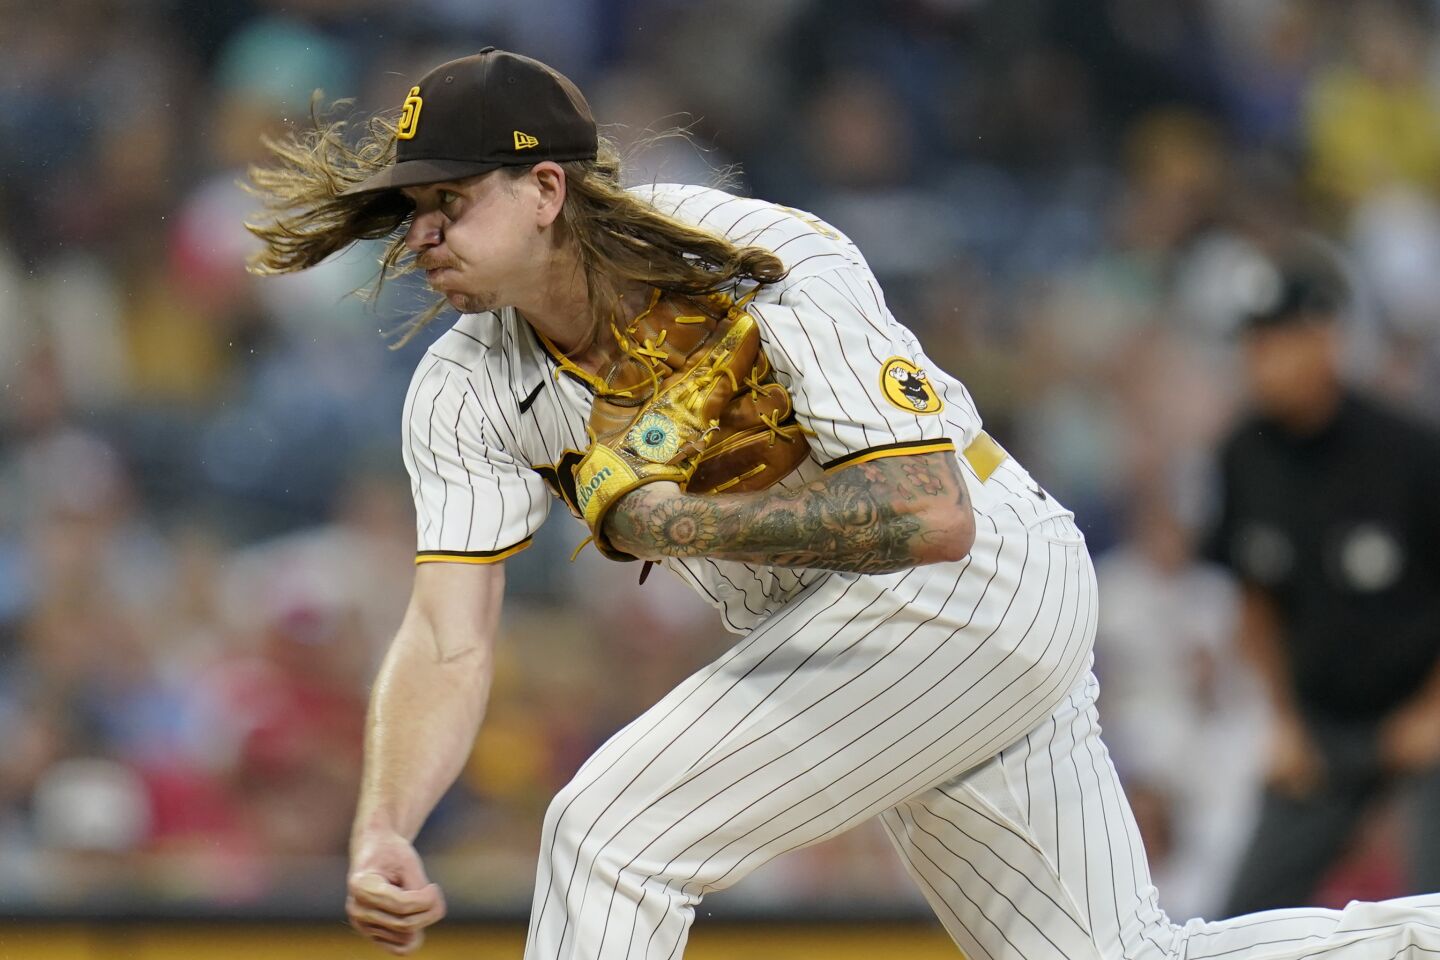 Game 2: Padres RHP Mike Clevinger (6-7, 4.49 ERA)Thursday’s bullpen game added an extra day of rest to Clevinger’s schedule. He has a 6.19 ERA over his last 10 starts, allowing 12 homers in 48 innings over that stretch. Clevinger has a 2.22 ERA in 56 2/3 innings in his career against the White Sox and last faced him in 2019 (0.86 ERA in 21 IP).